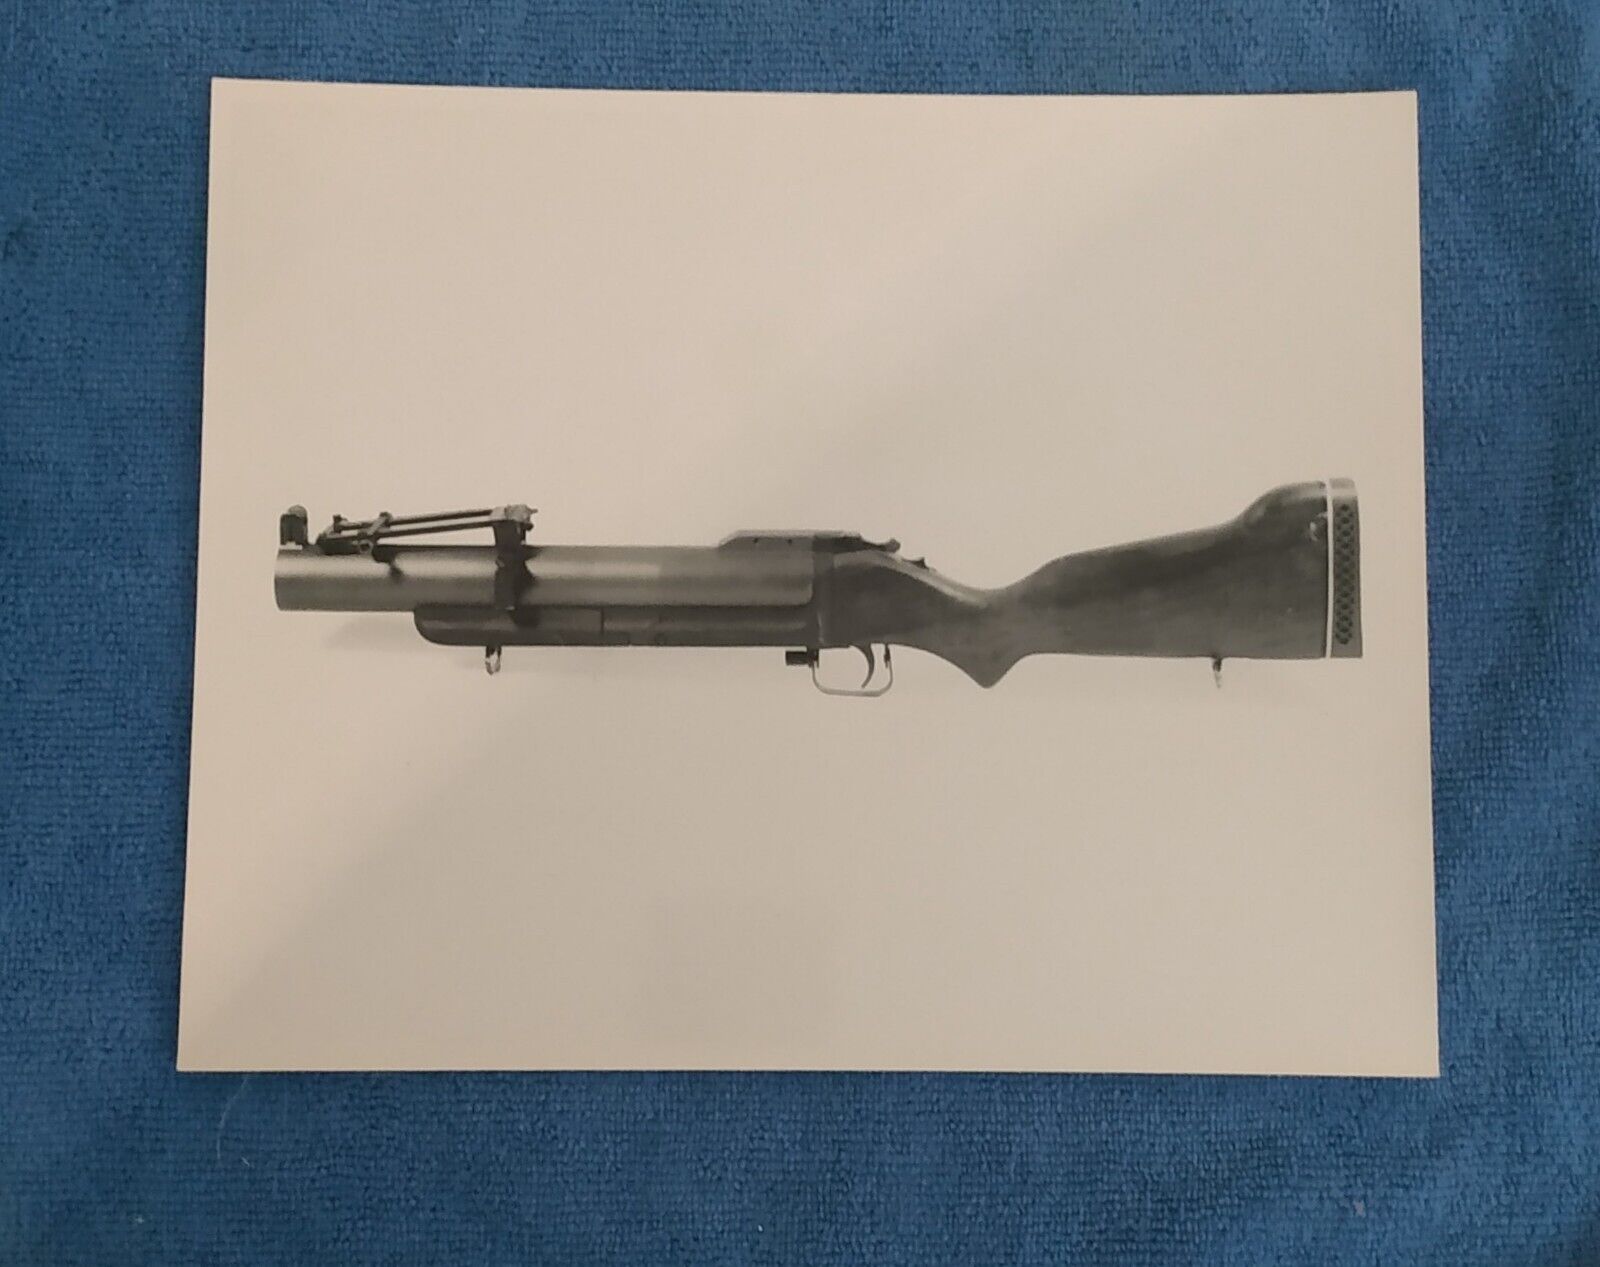 Vintage Colt Reference Photo of US M79 Grenade Launcher from Bob Roy